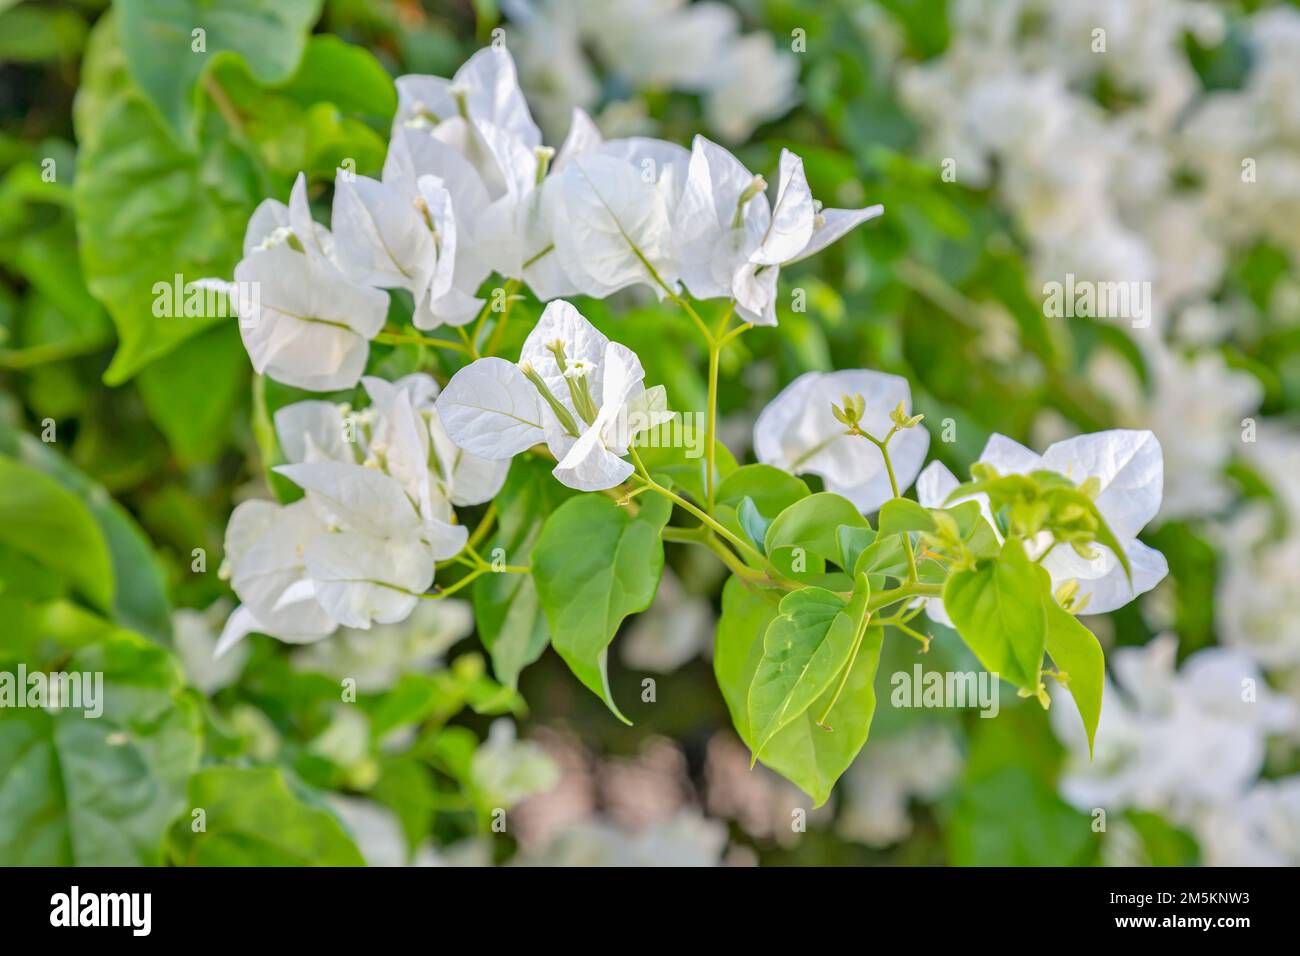 blooming white bougainvillea flowers in the garden. Stock Photo